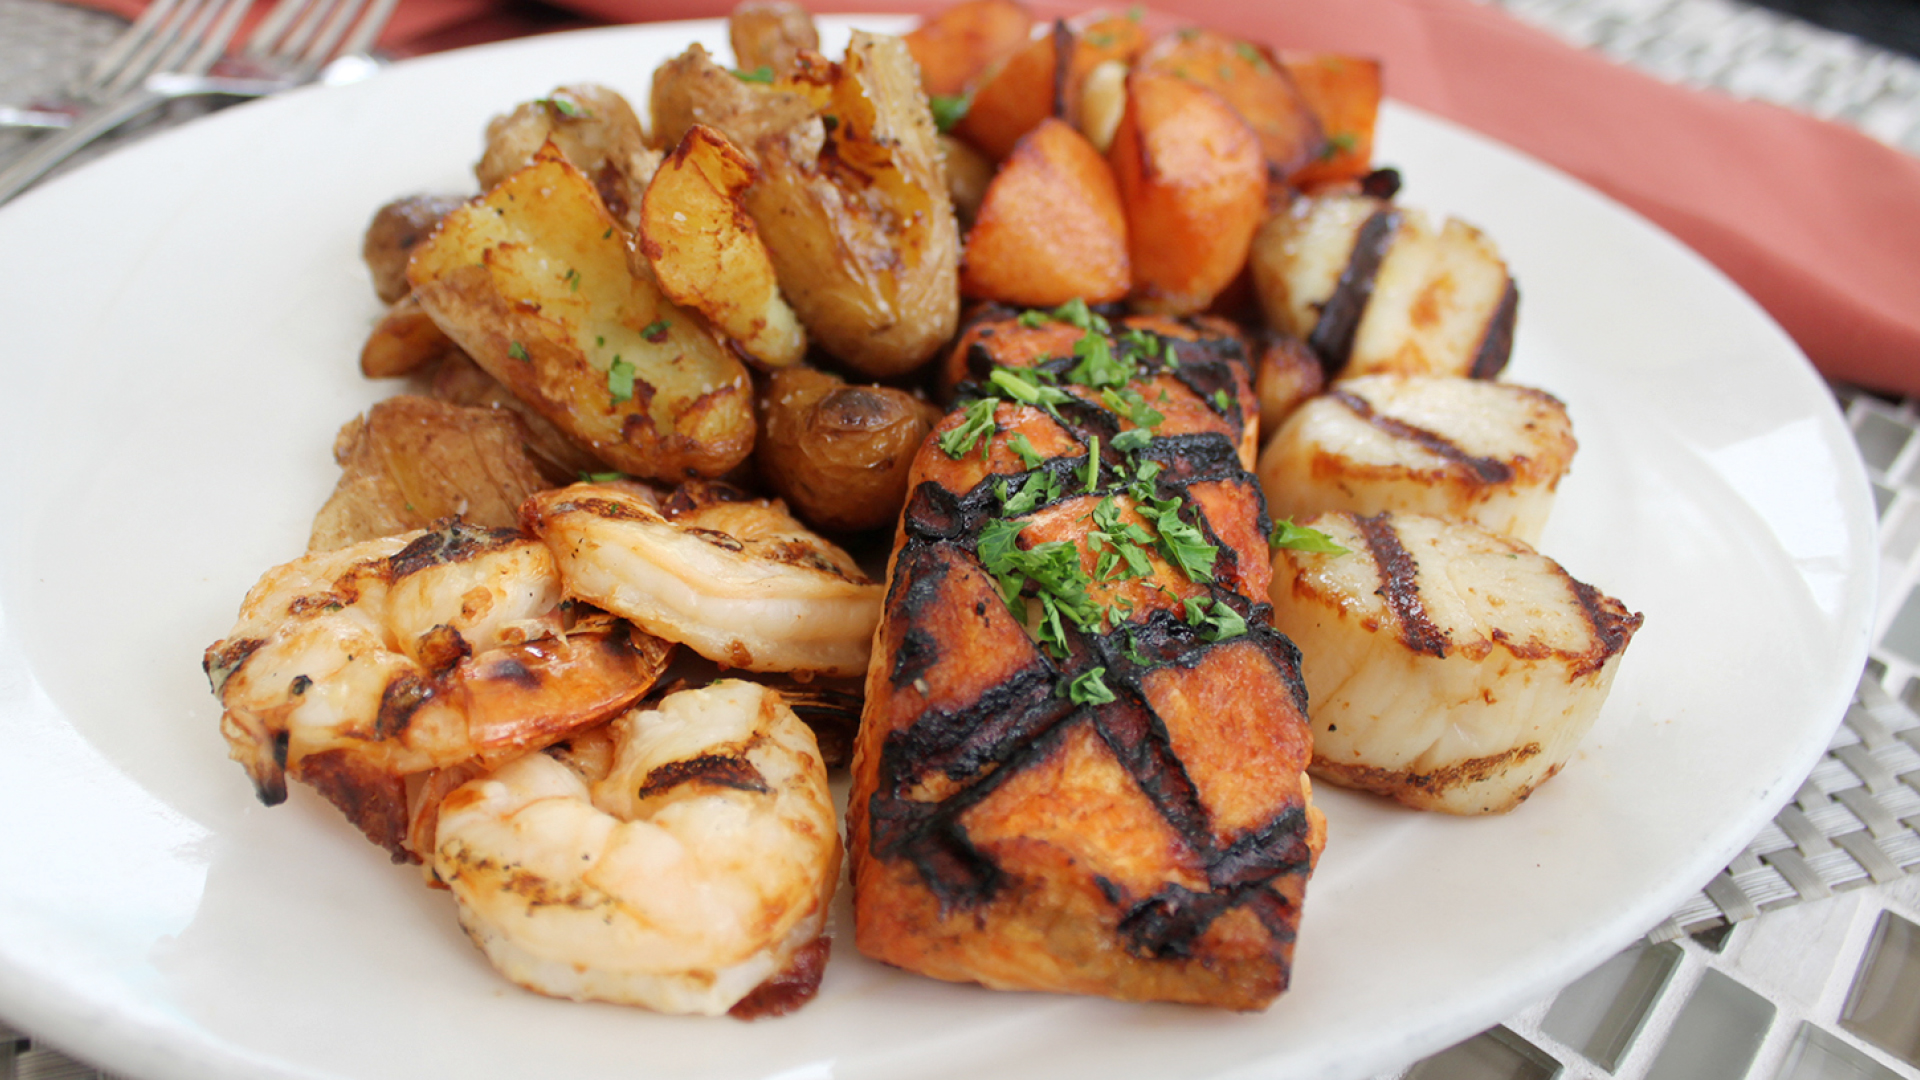 Seafood dinner on a white plate with grilled shrimp, grilled salmon filet and grilled scallops with roasted fingerling potatoes and roasted carrots.